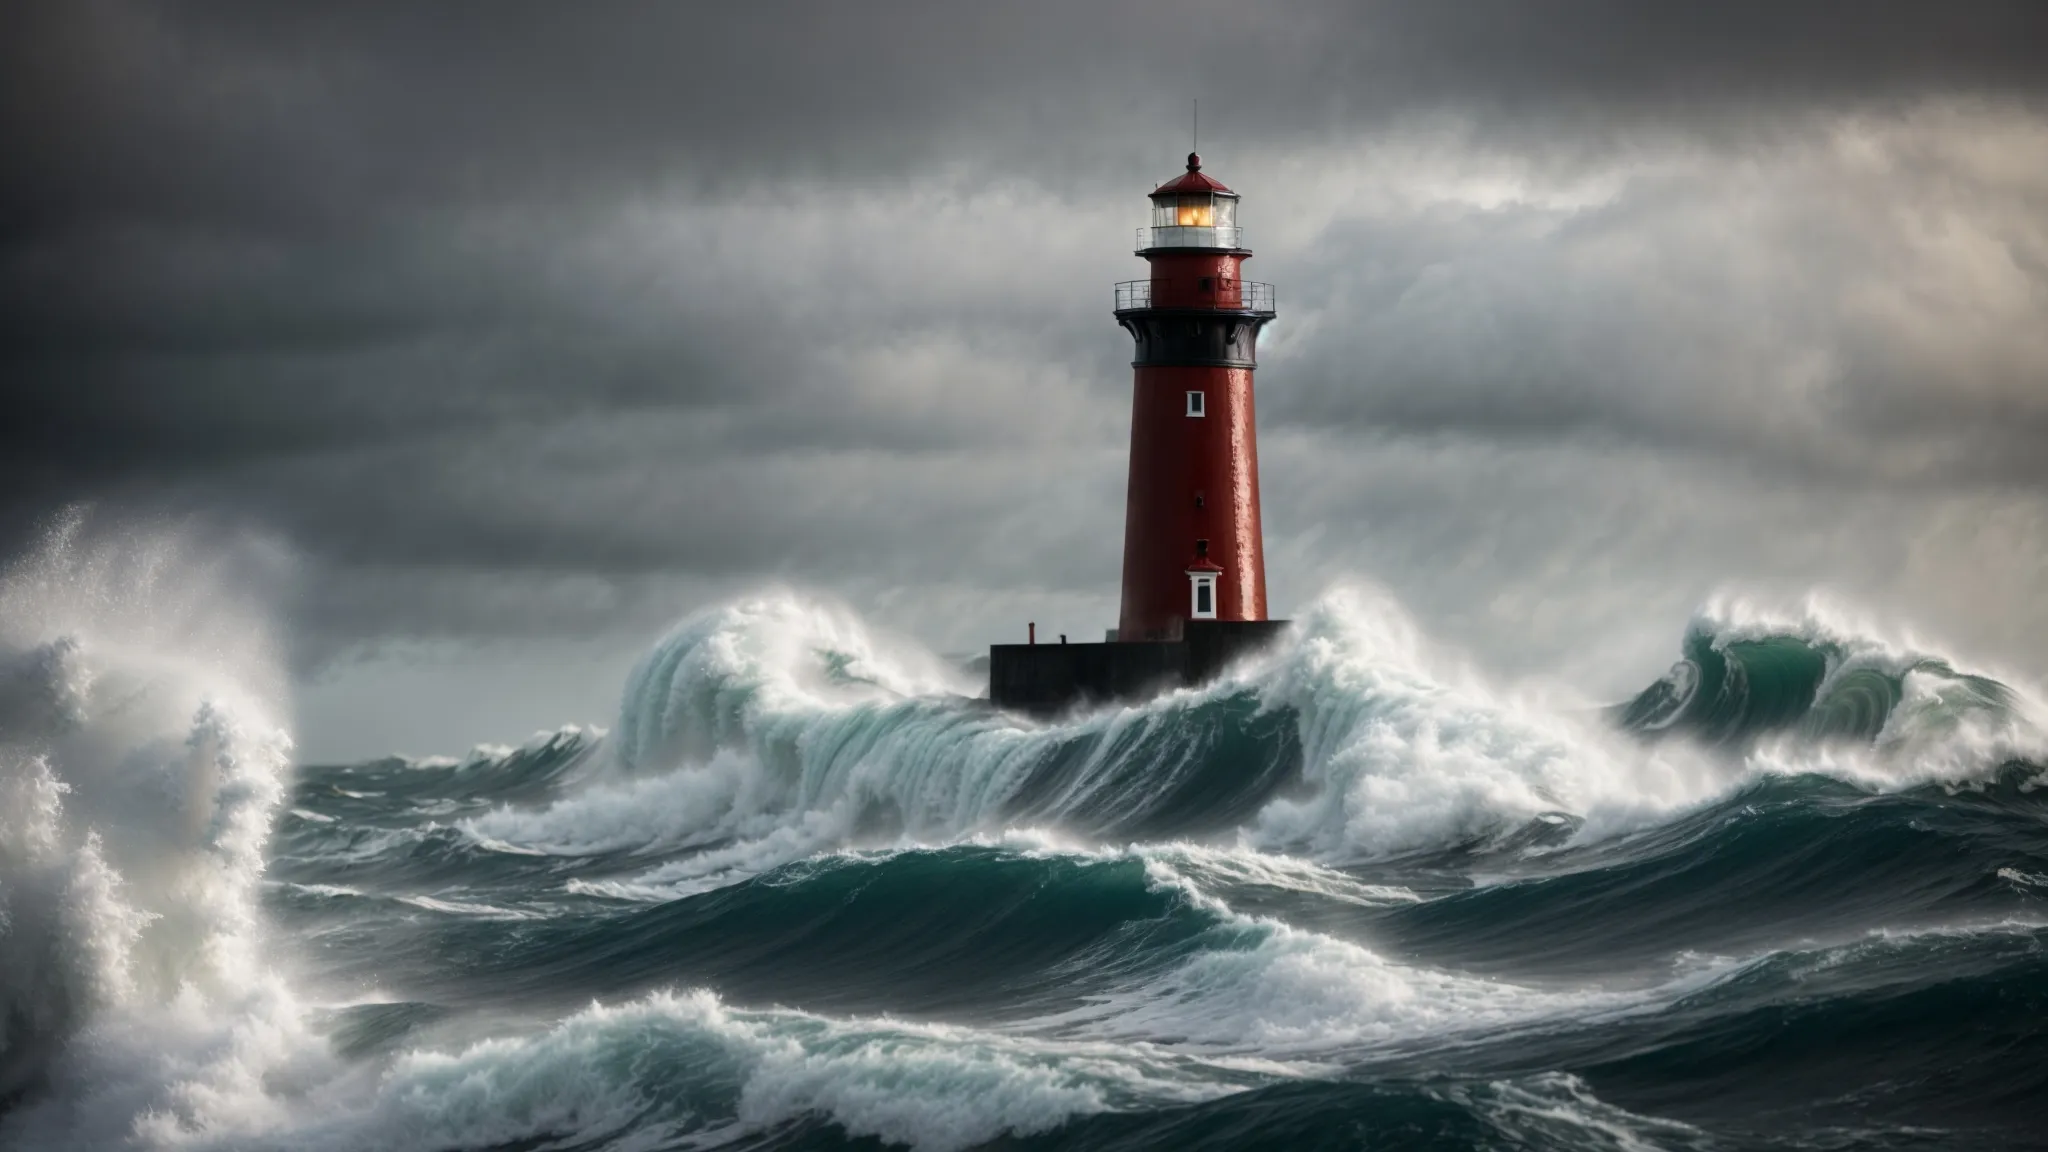 a lighthouse standing tall amidst turbulent seas, guiding ships safely towards the shore.